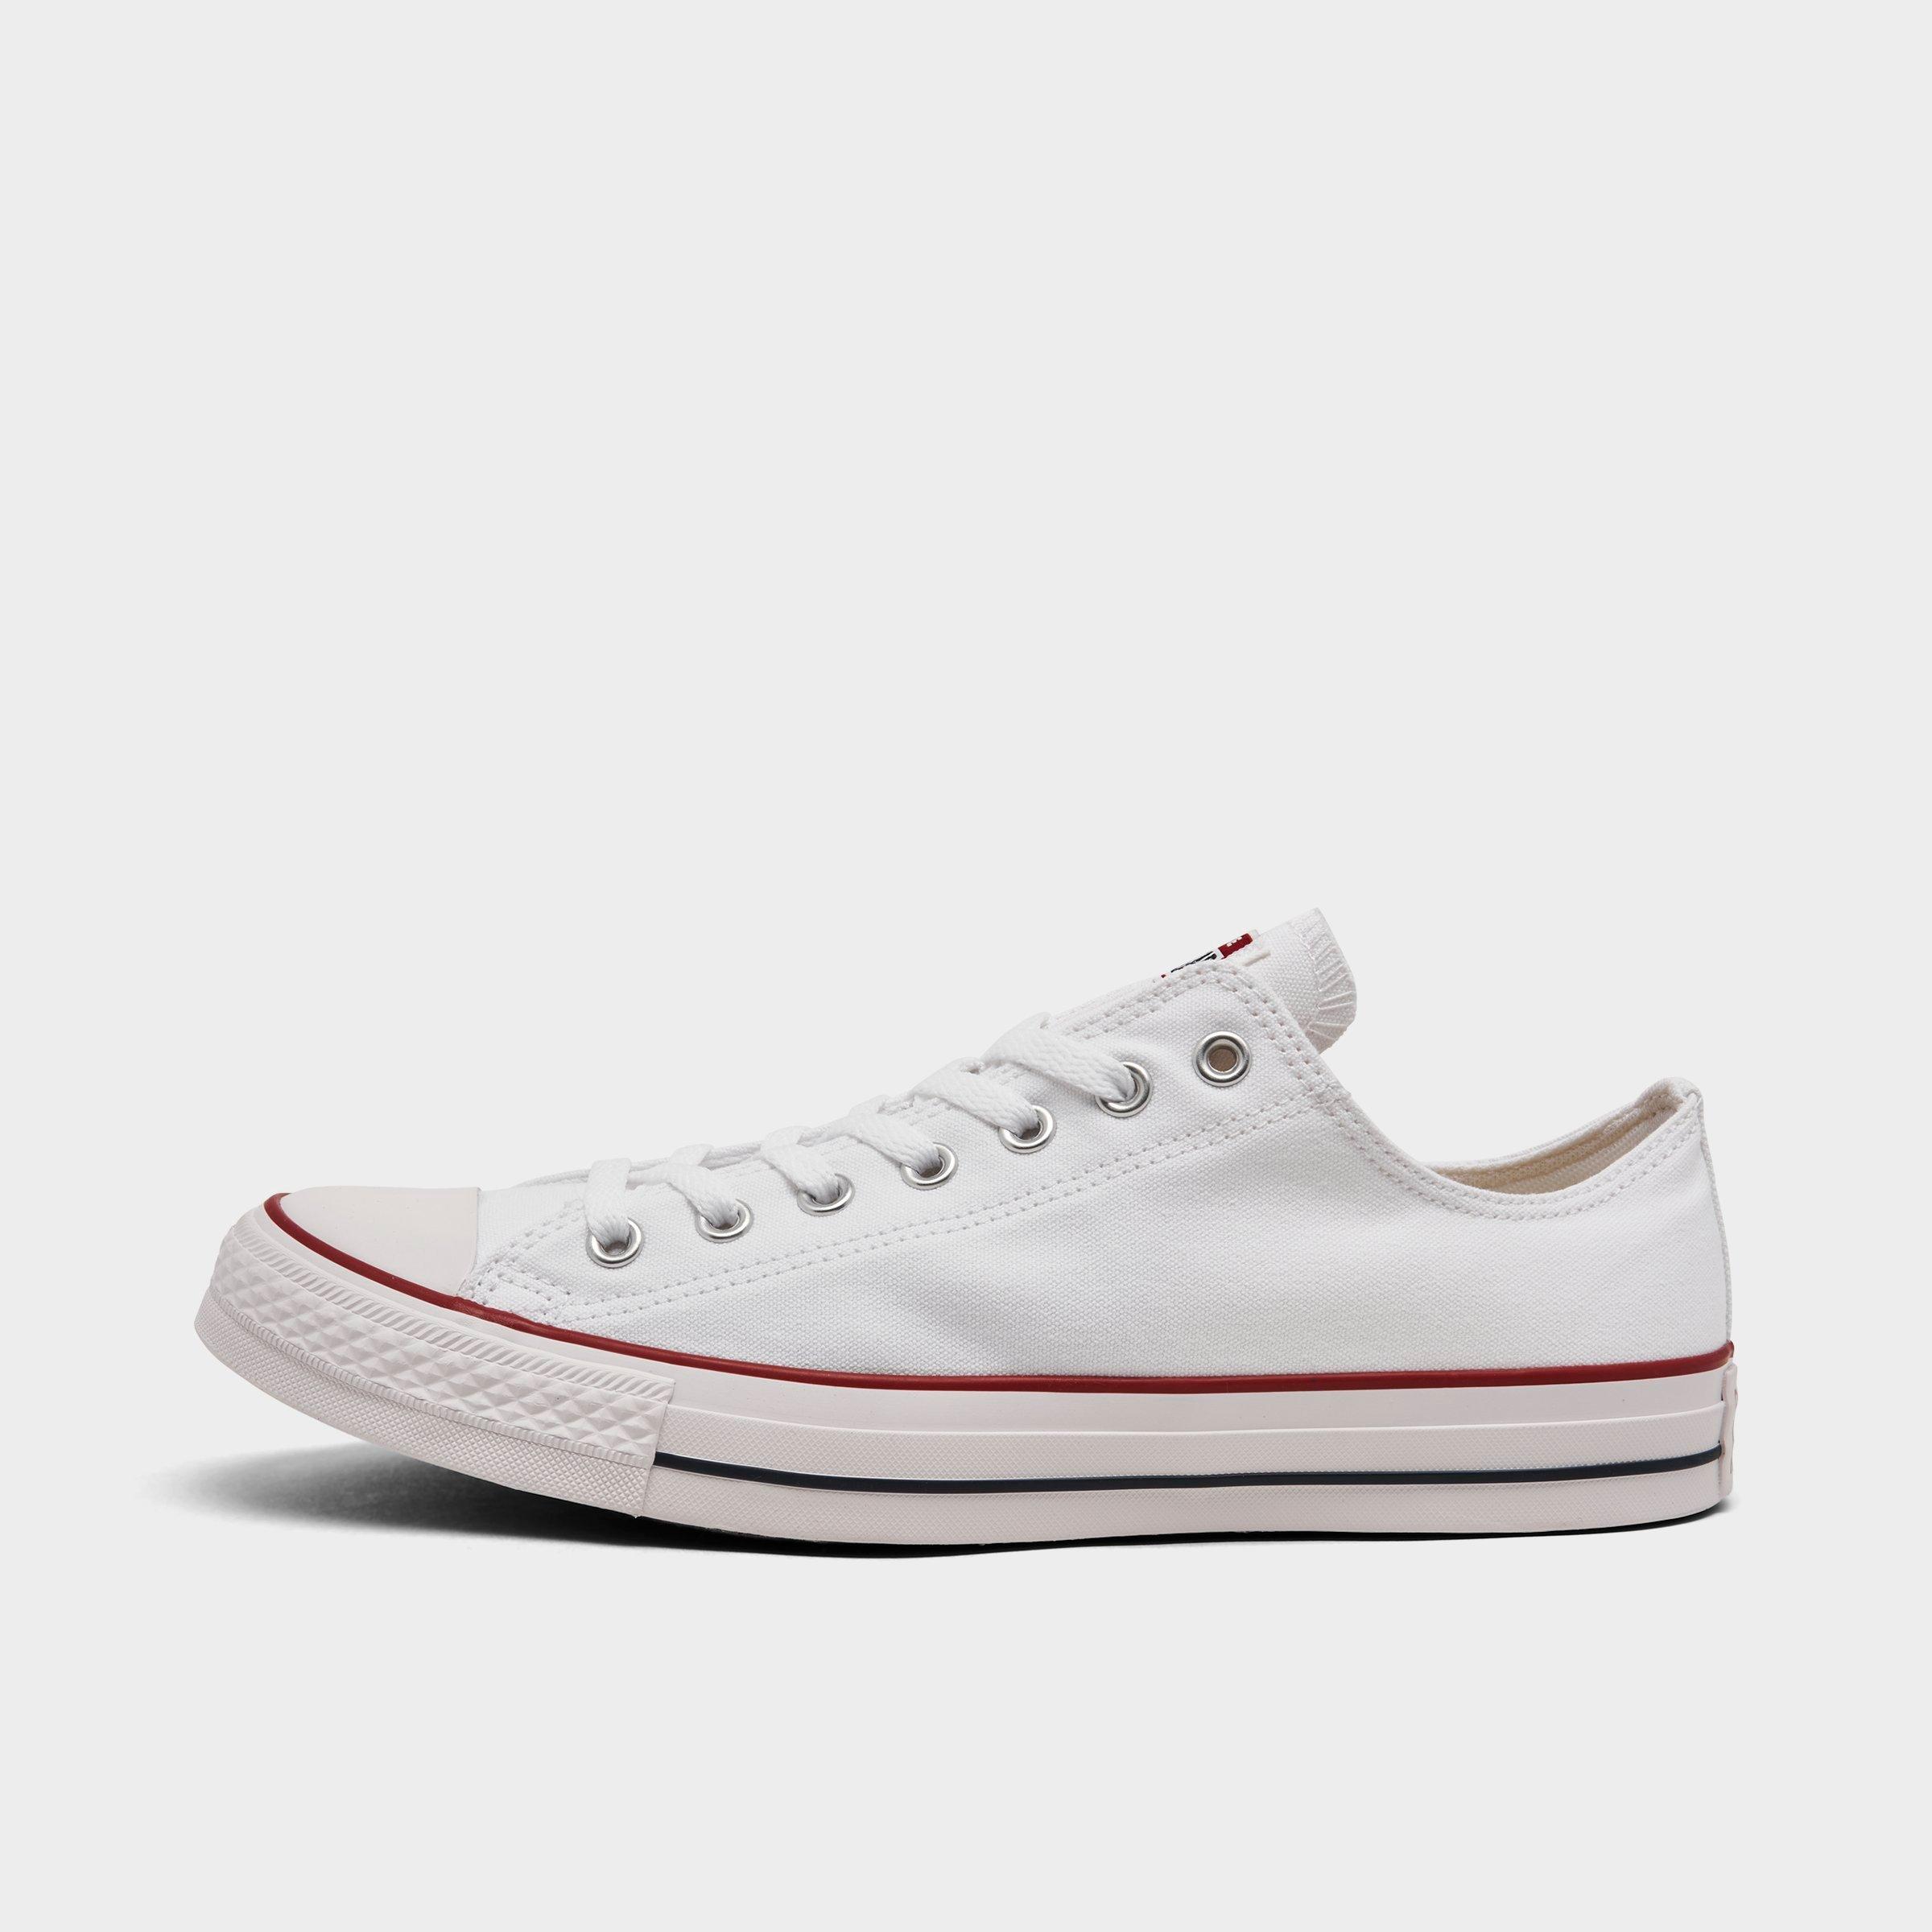 Converse Shoes, Chuck Taylors, Low \u0026 High Tops | Finish Line